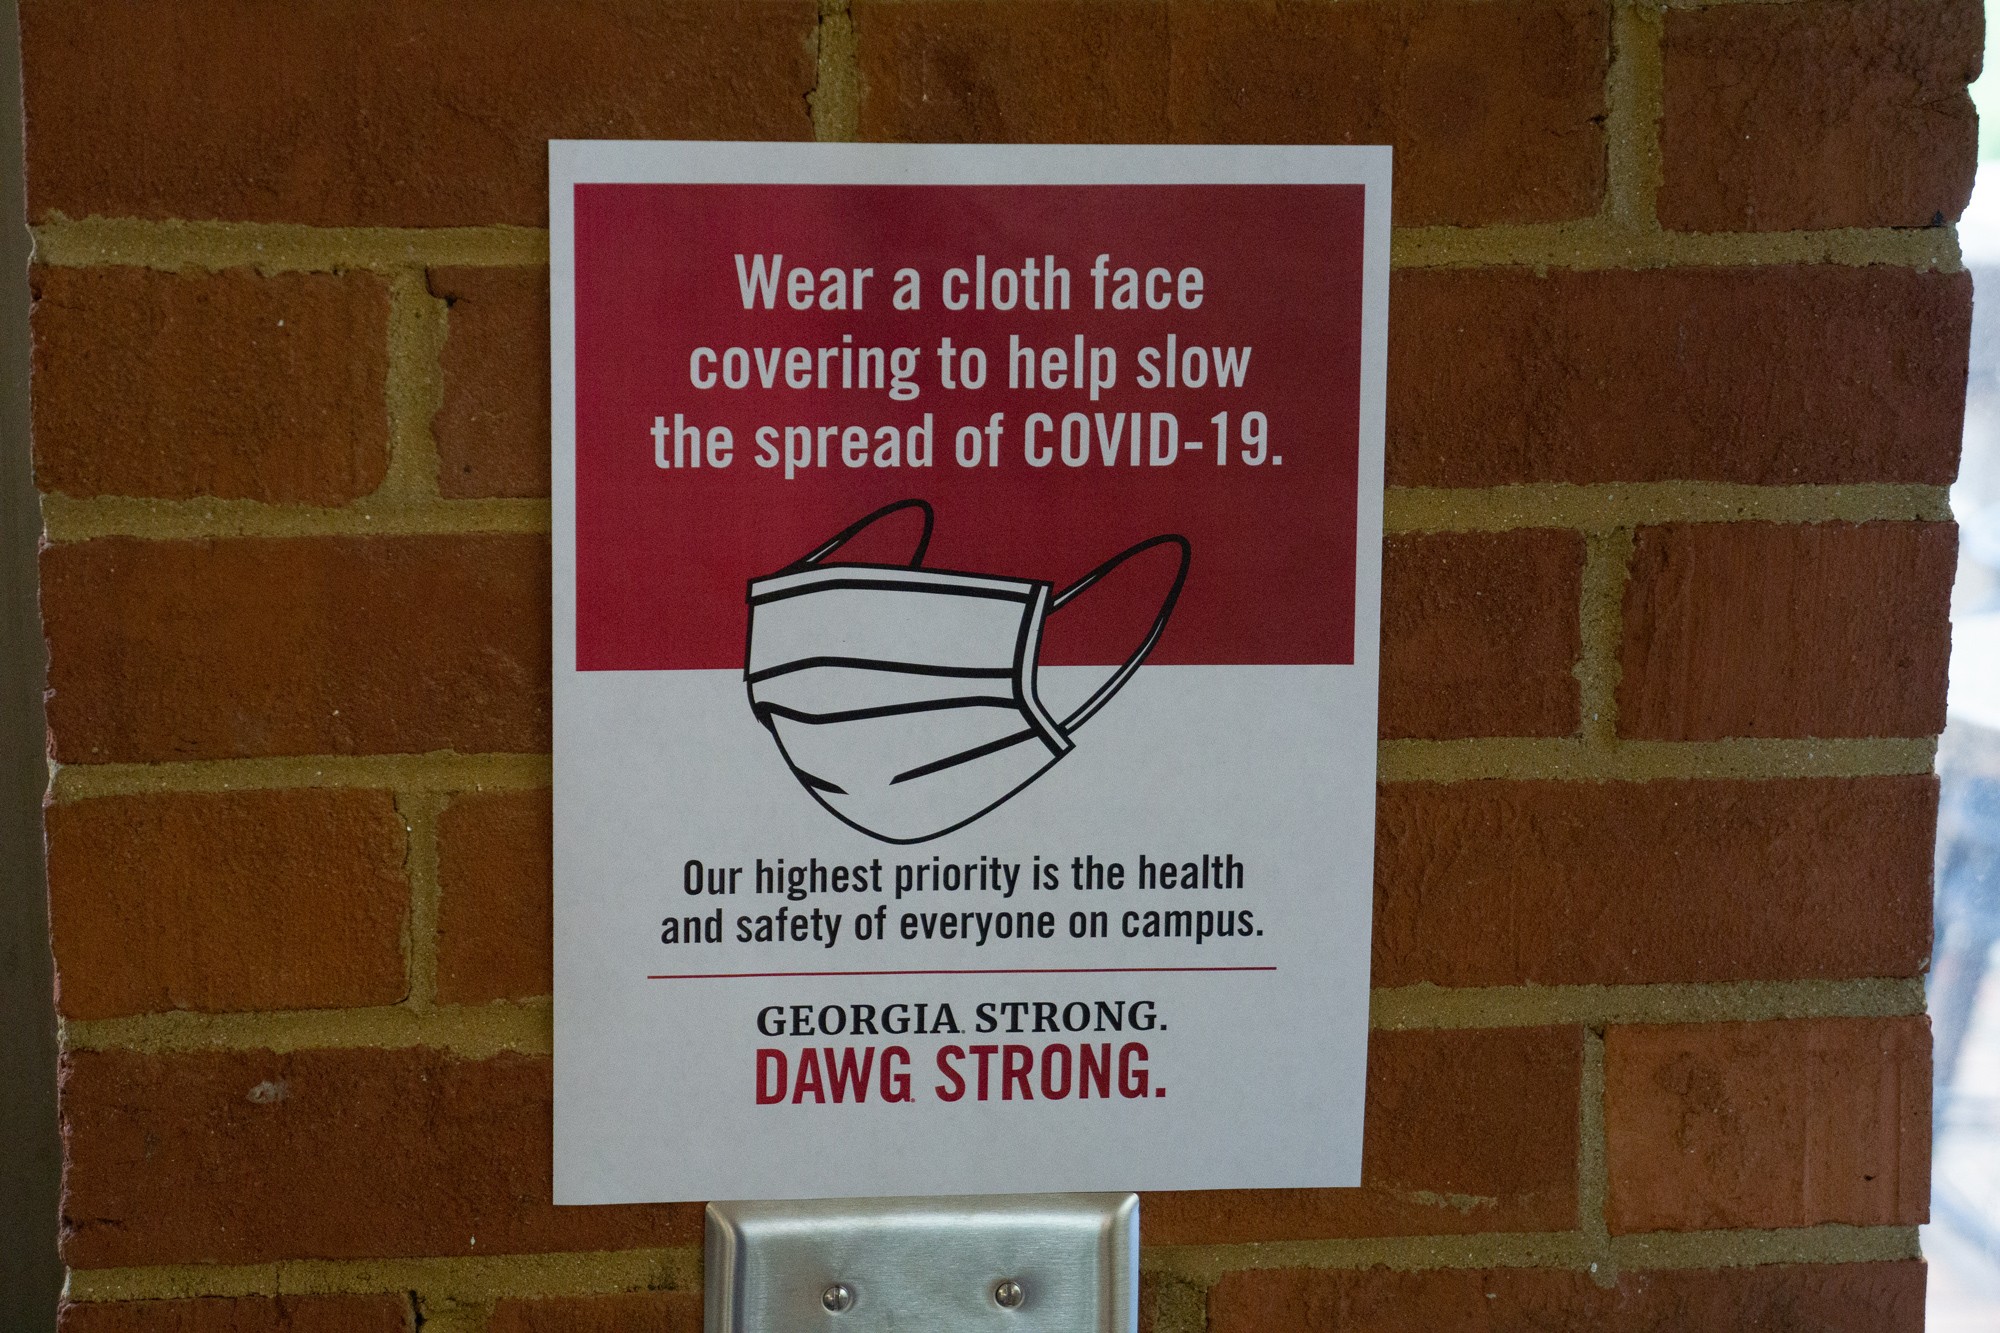 image of signage indicating the requirement of face covering in buildings